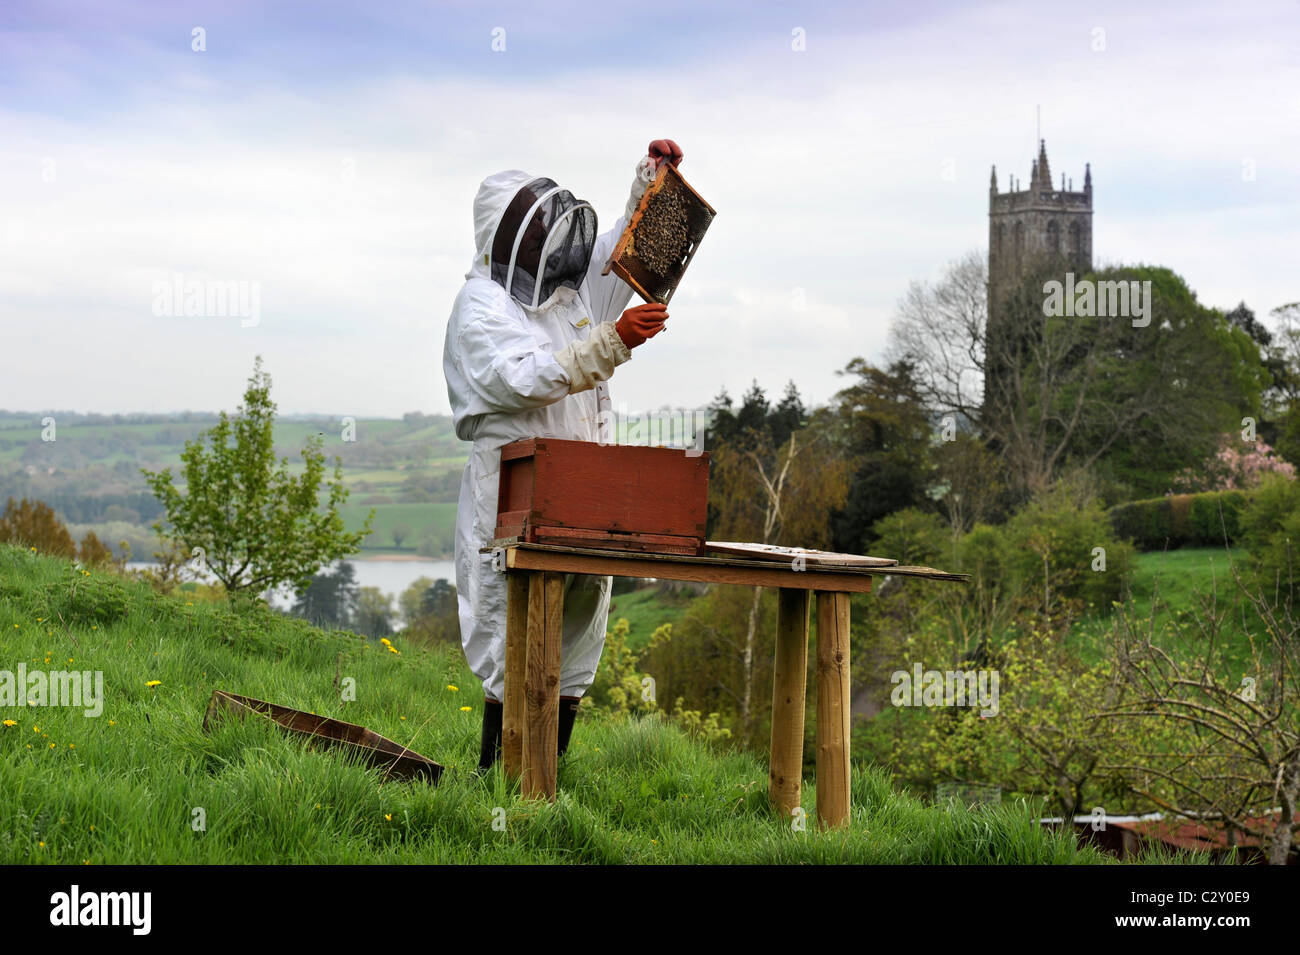 A beekeeper attends to his hive in the Somerset village of Blagdon UK Stock Photo